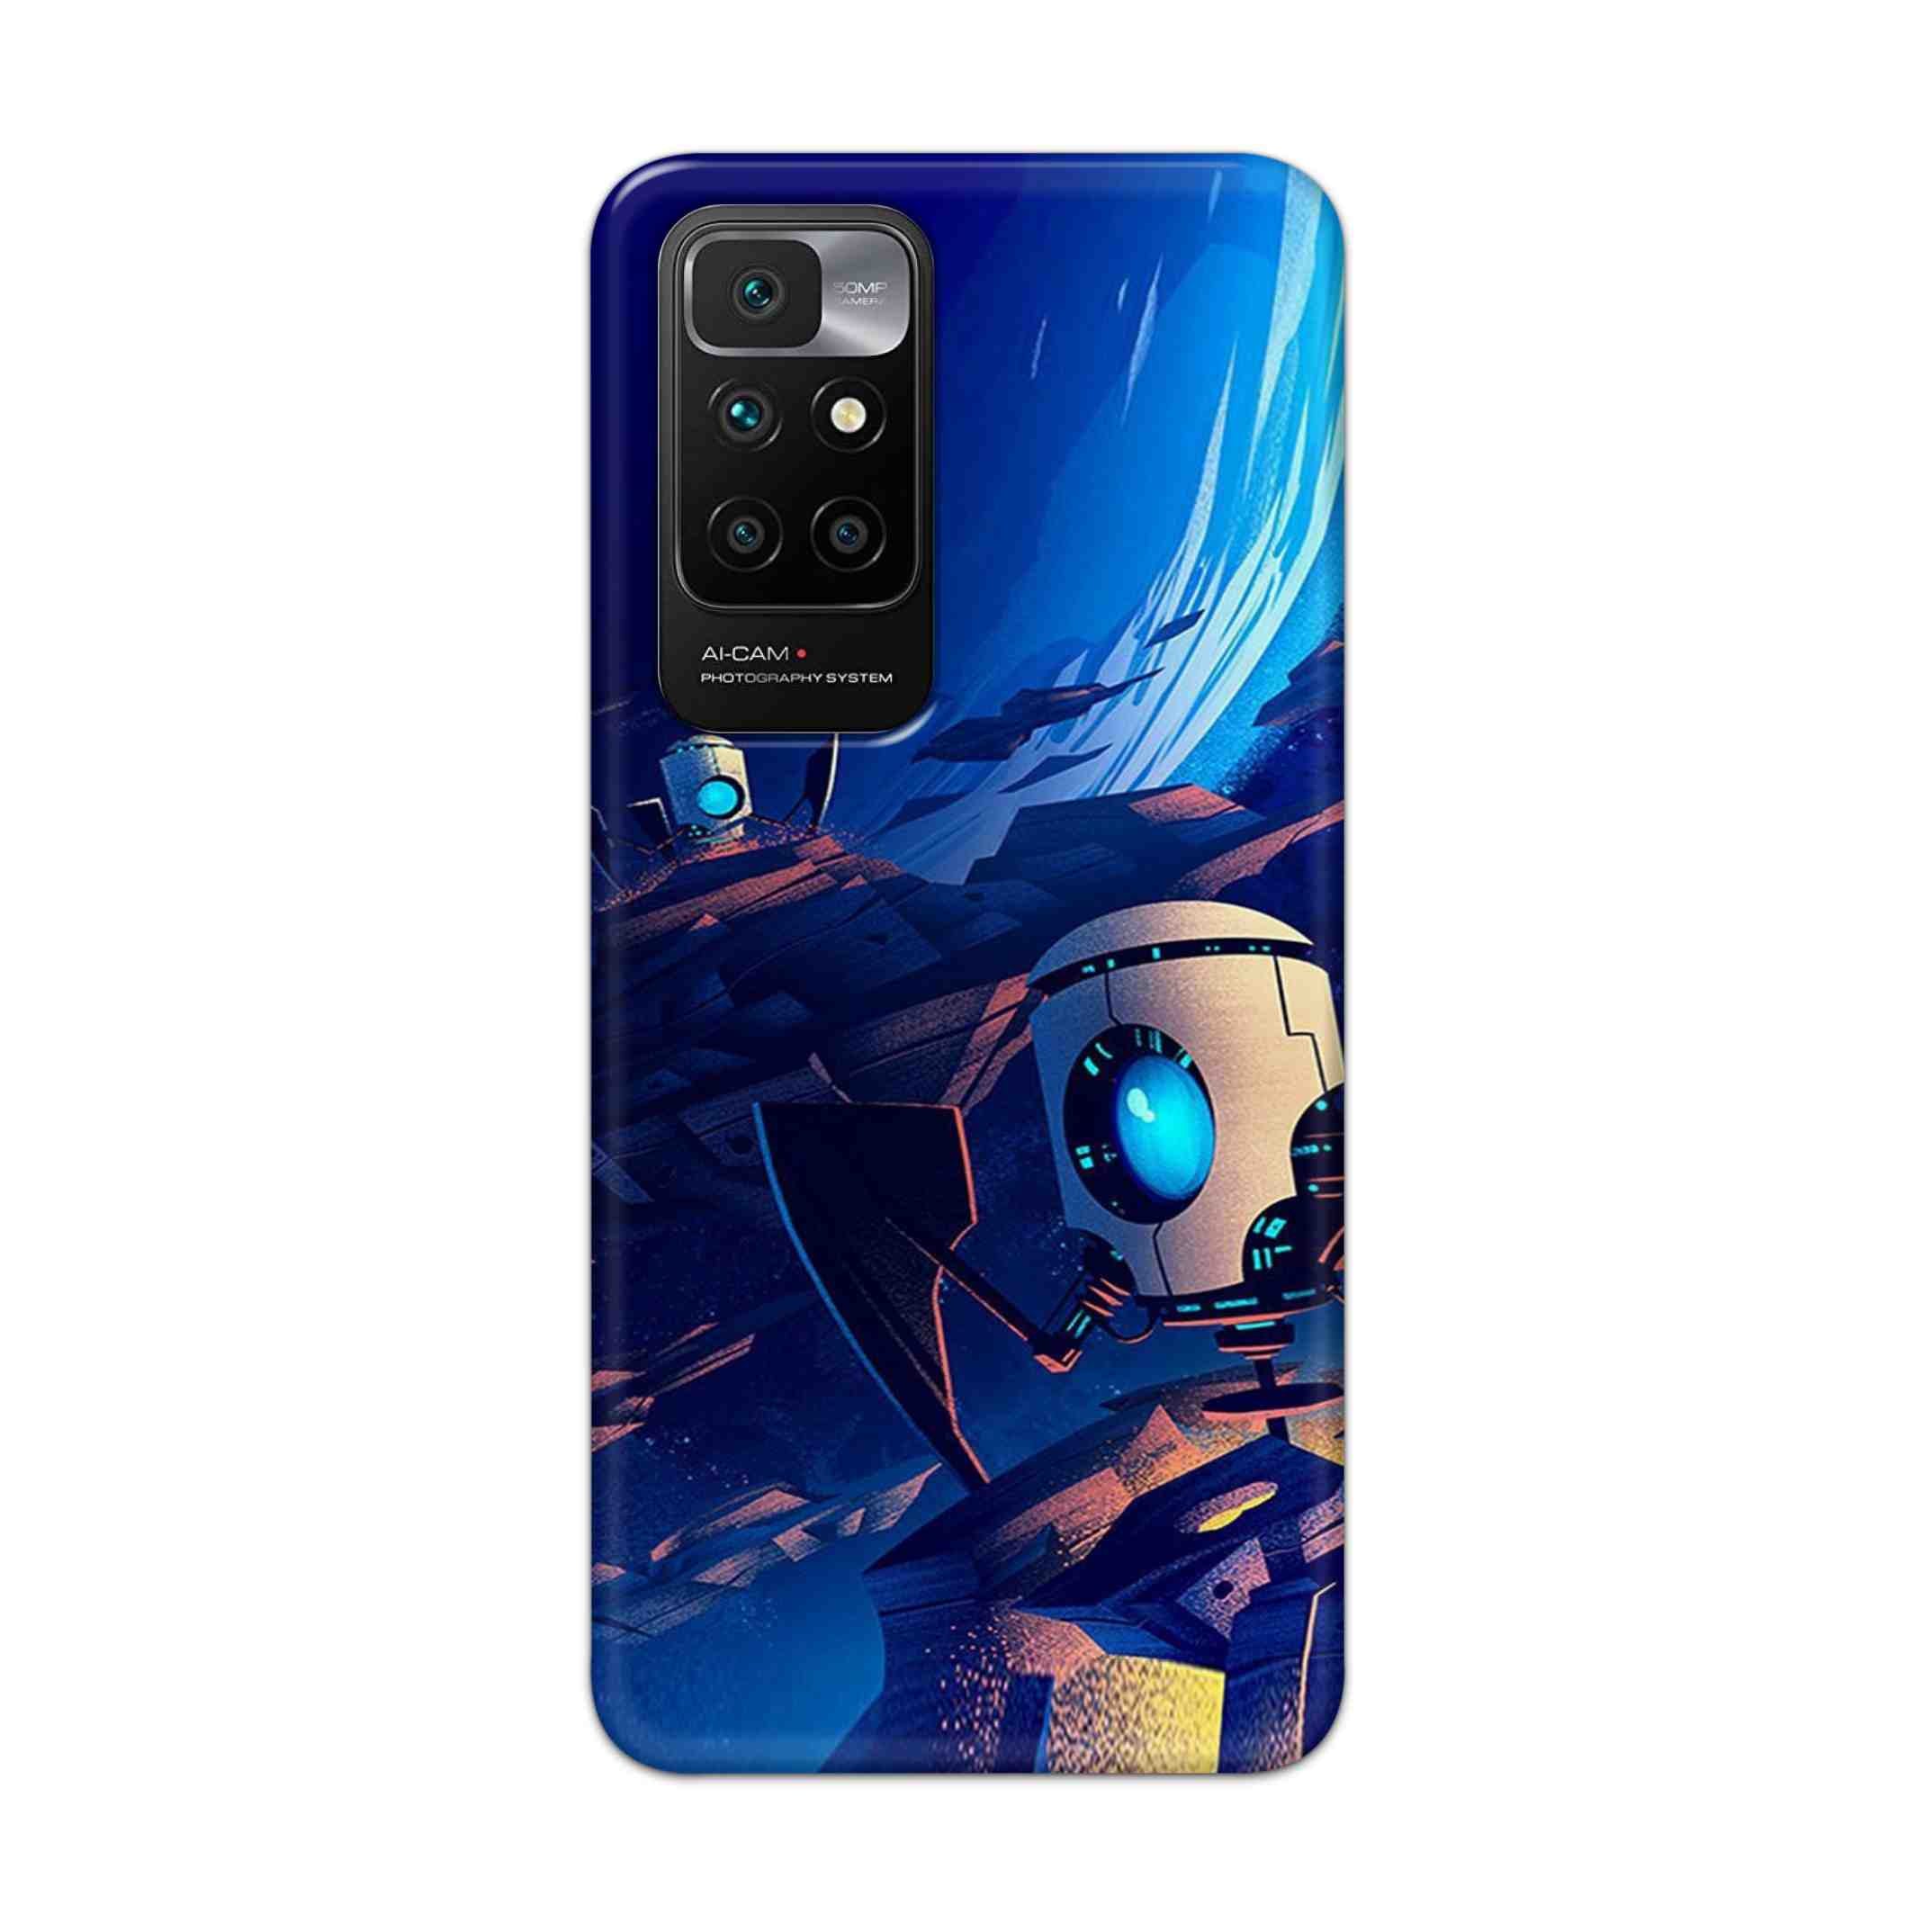 Buy Spaceship Robot Hard Back Mobile Phone Case Cover For Redmi 10 Prime Online